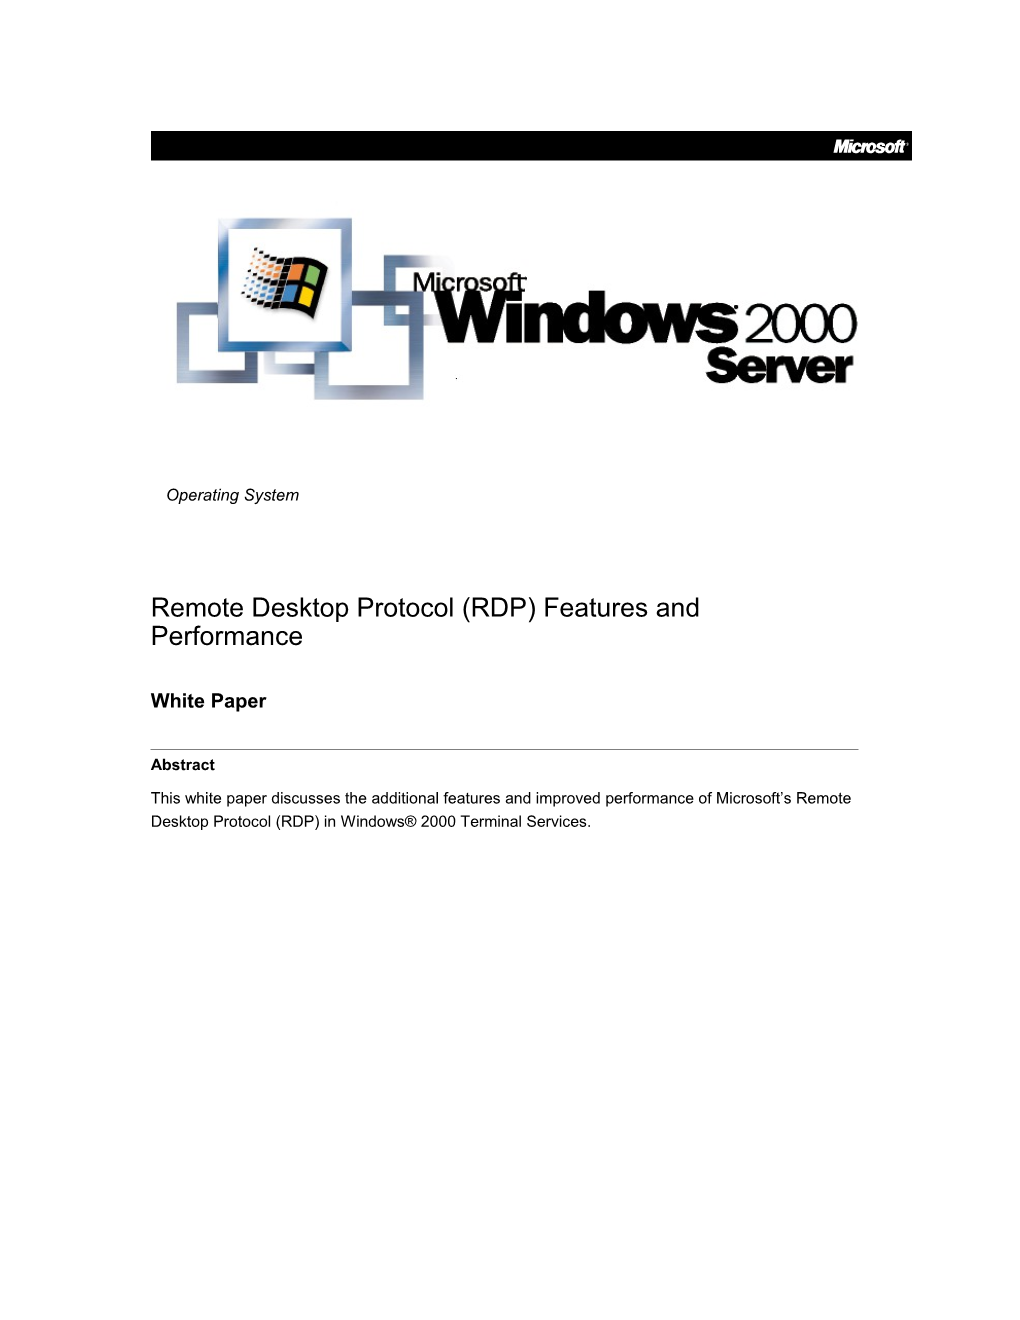 Remote Desktop Protocol (RDP) Features and Performance